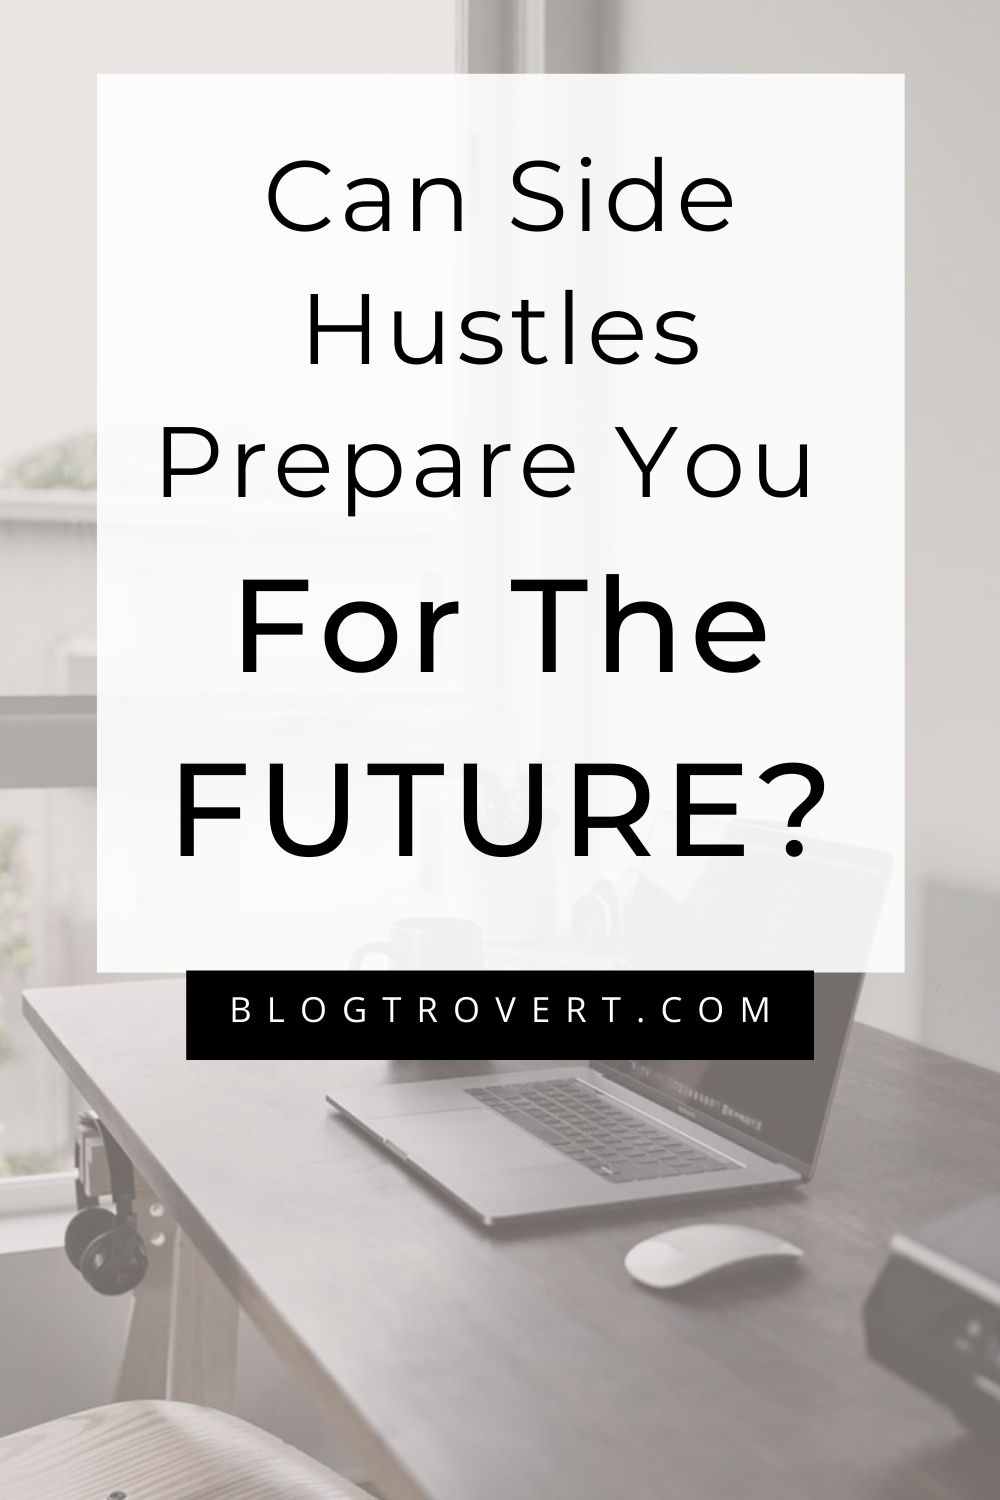 Find your future with side hustles